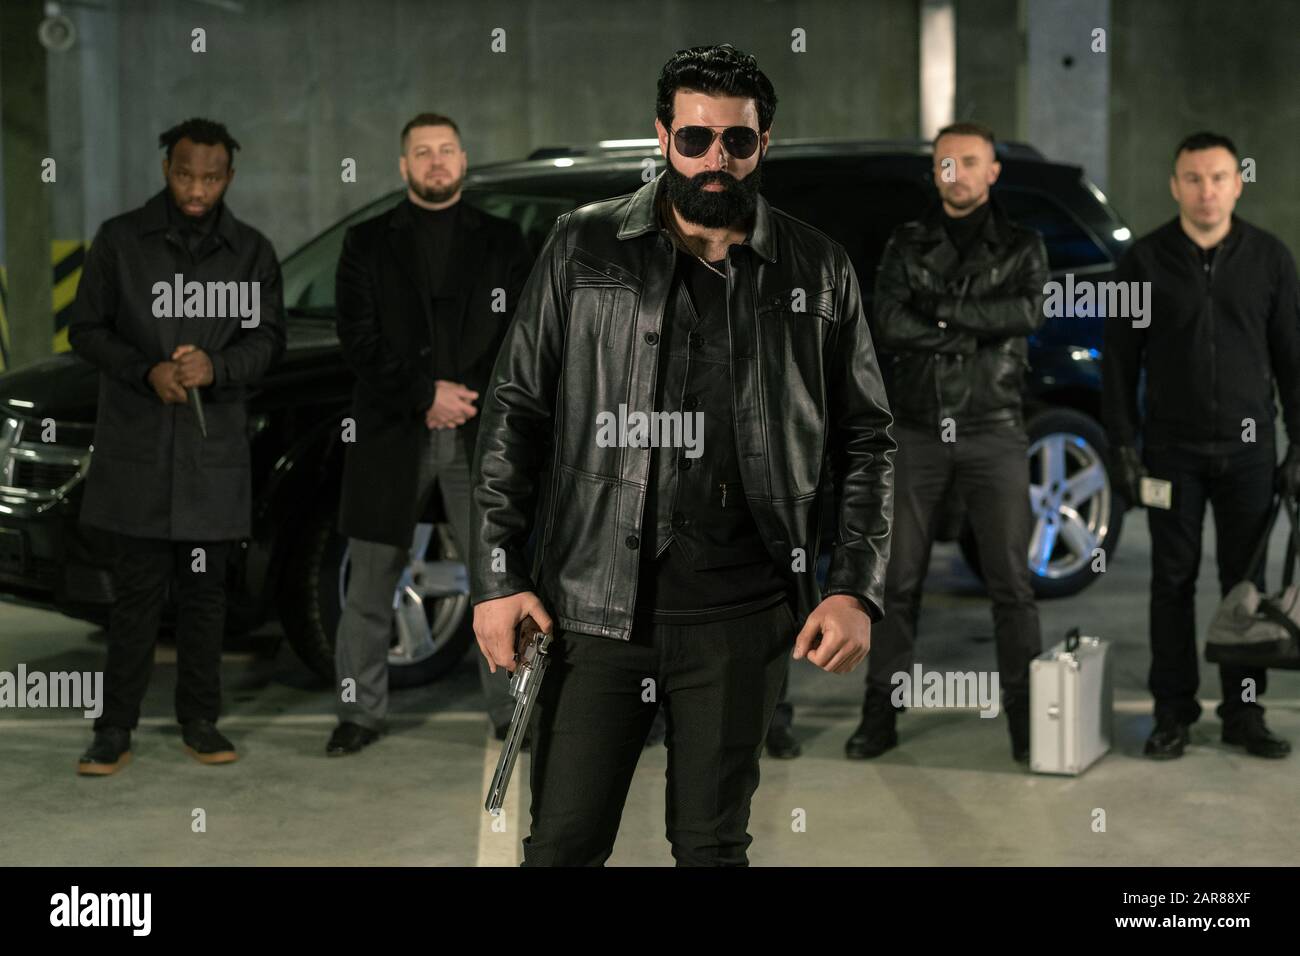 Bearded criminal authority in sunglasses, black leather jacket and jeans Stock Photo